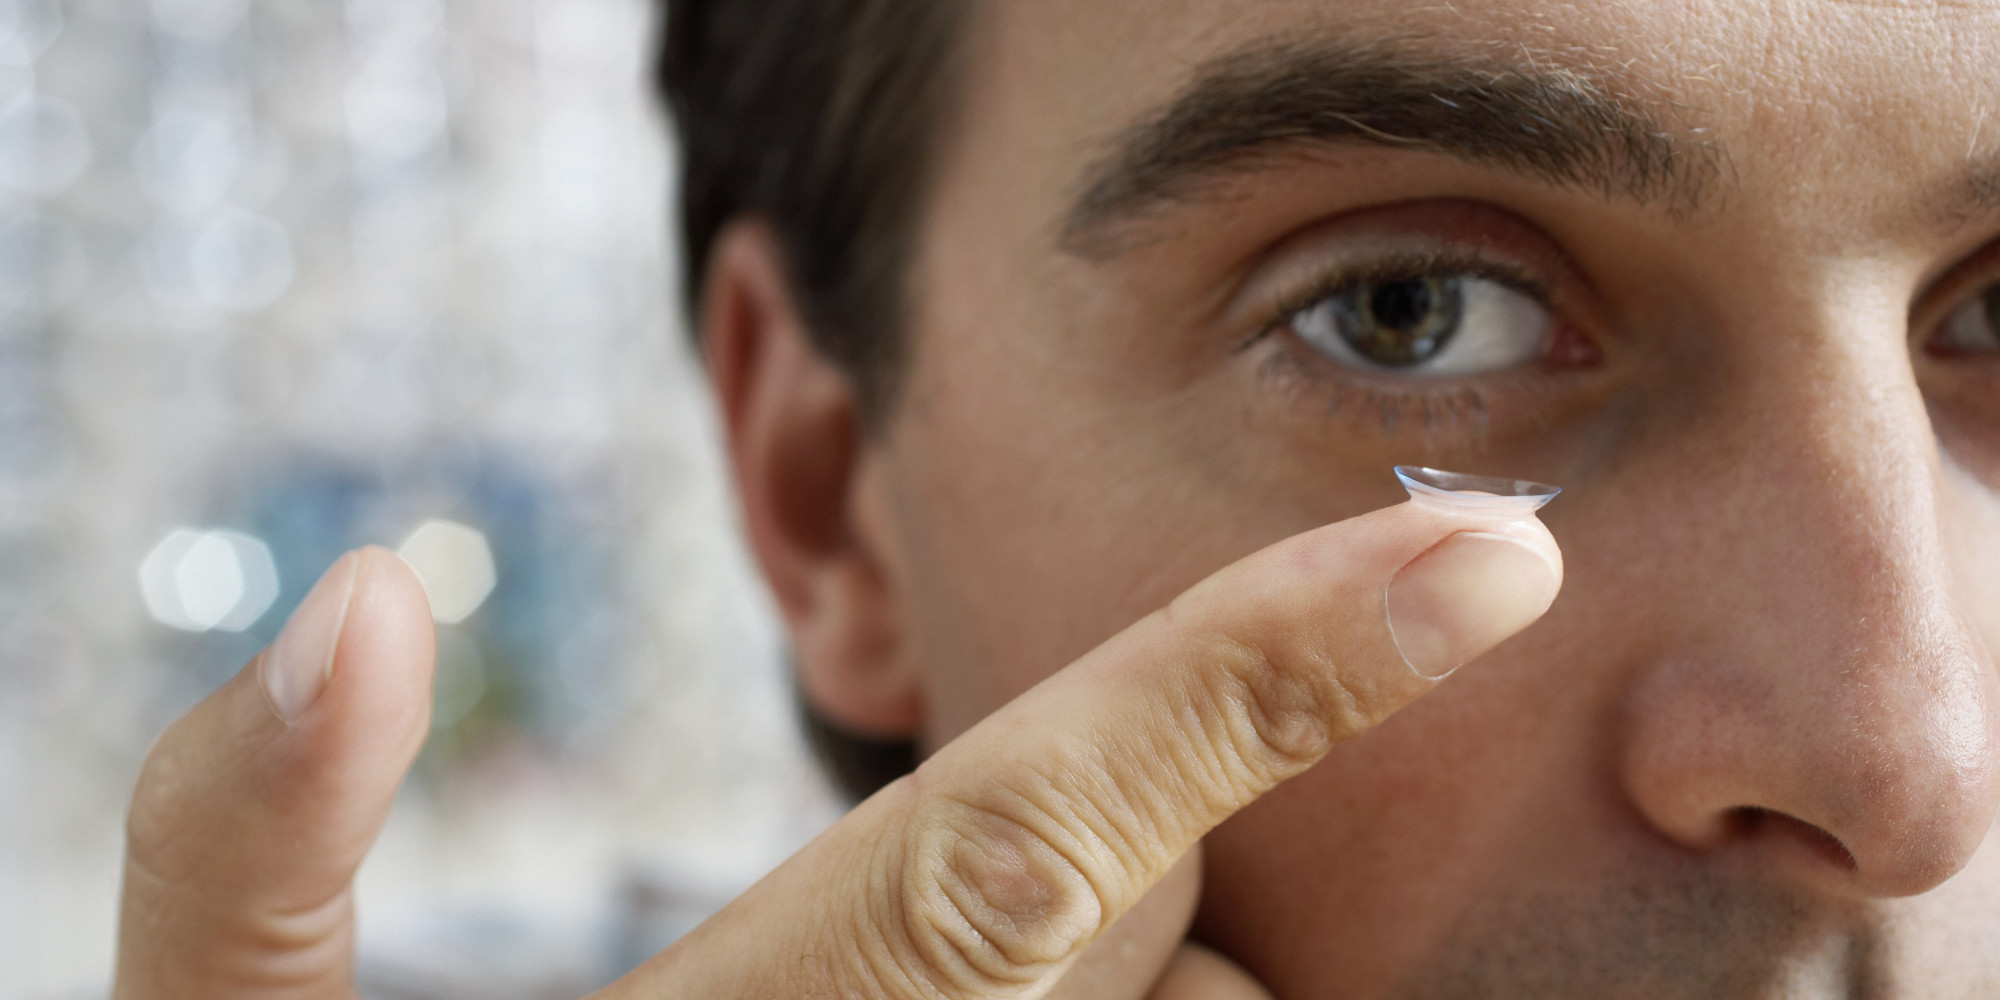 99% Of Contact Lens Wearers Risking Severe Eye Infections And Blindness